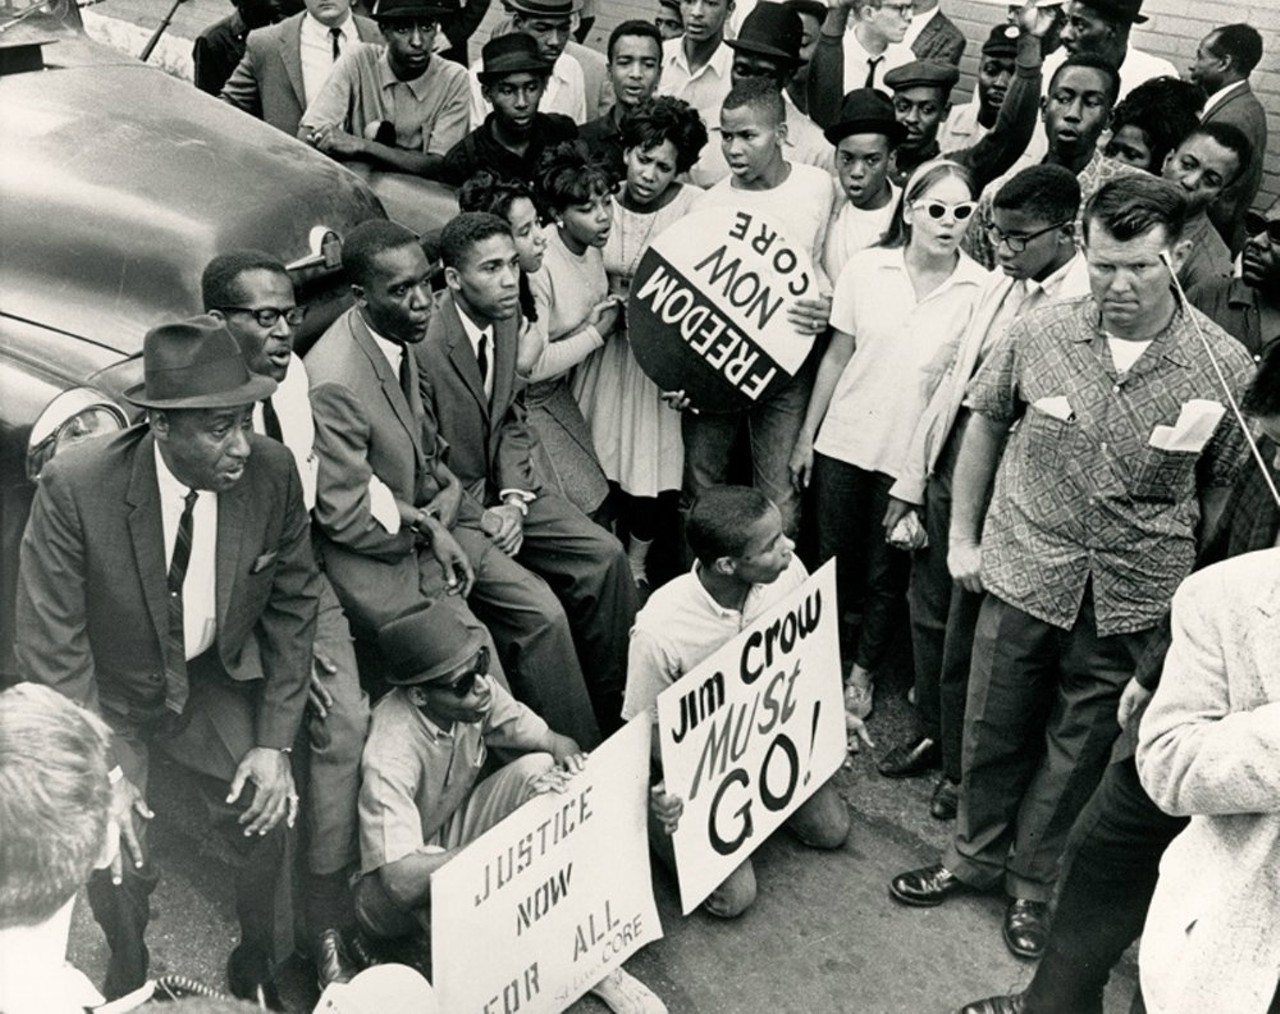 #1 in Civil Rights
Mondays, Wednesdays-Sundays, 10 a.m.-5 p.m. Continues through April 15, 2018. Missouri History Museum, 
Lindell Blvd. & DeBaliviere Avenue, St. Louis. 
Photo courtesy of the Missouri History Museum. Jefferson Bank and Trust Co. Protest, October 1963. St. Louis American image.